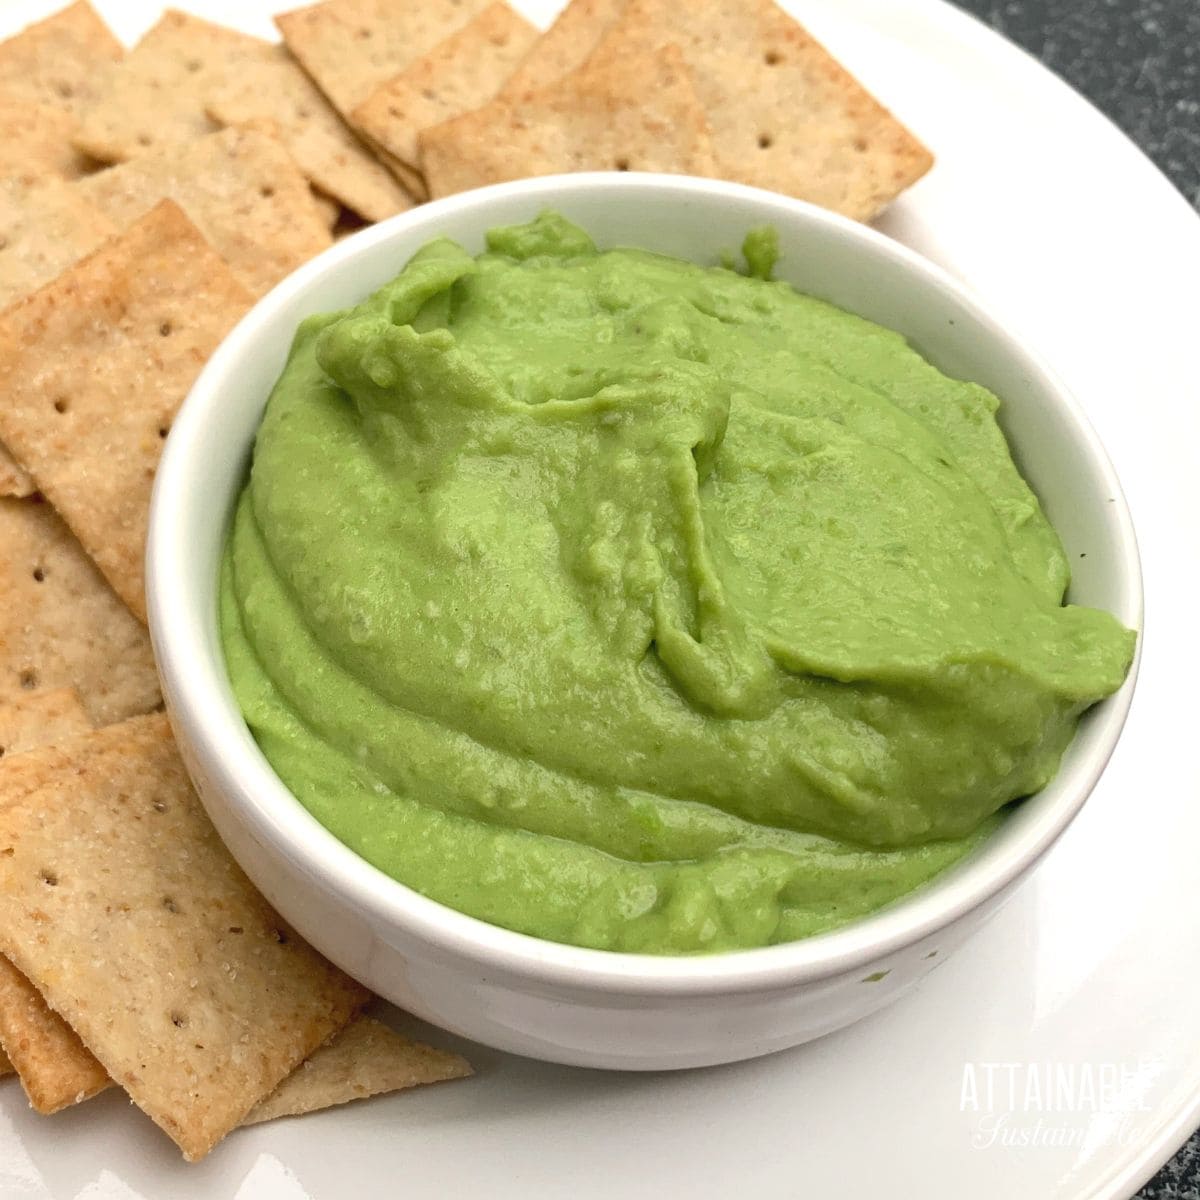 white bowl filled with bright green fava bean hummus, crackers on the side.